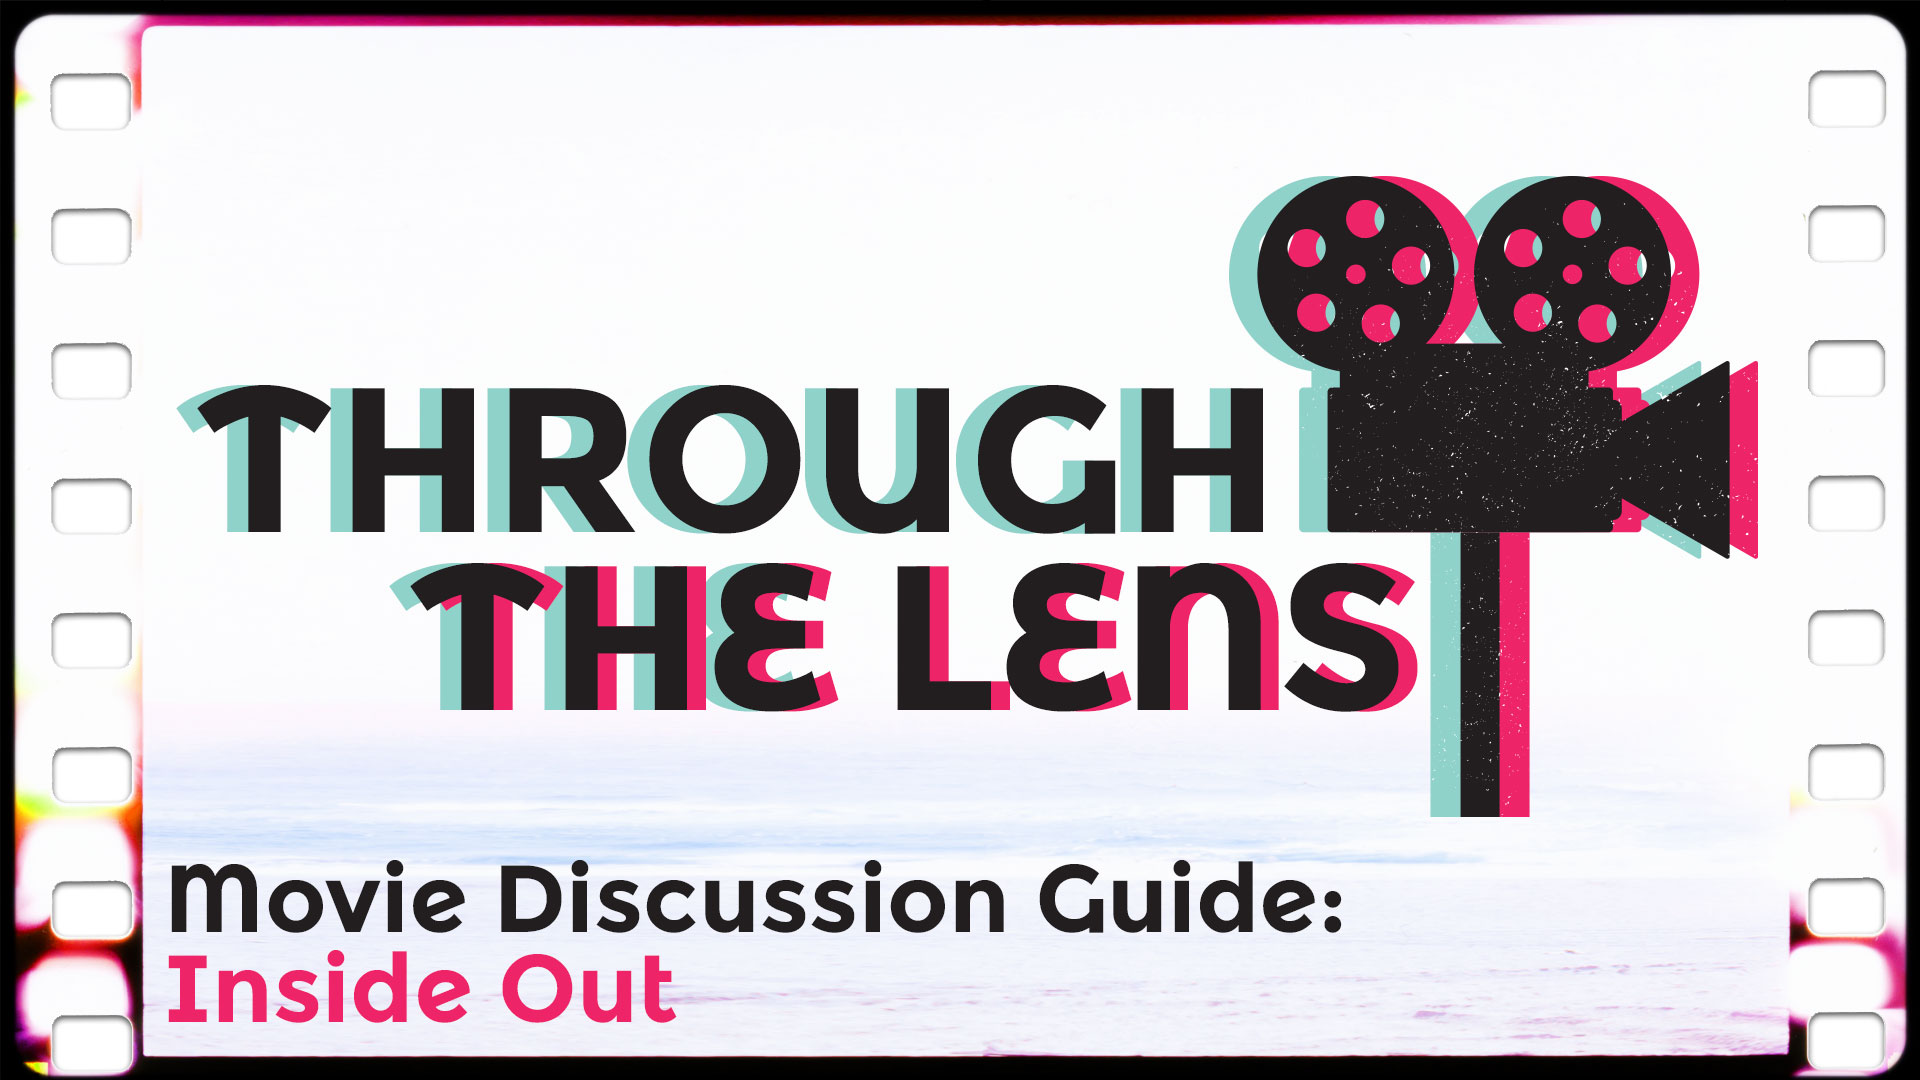 Movie Discussion Guide: Inside Out